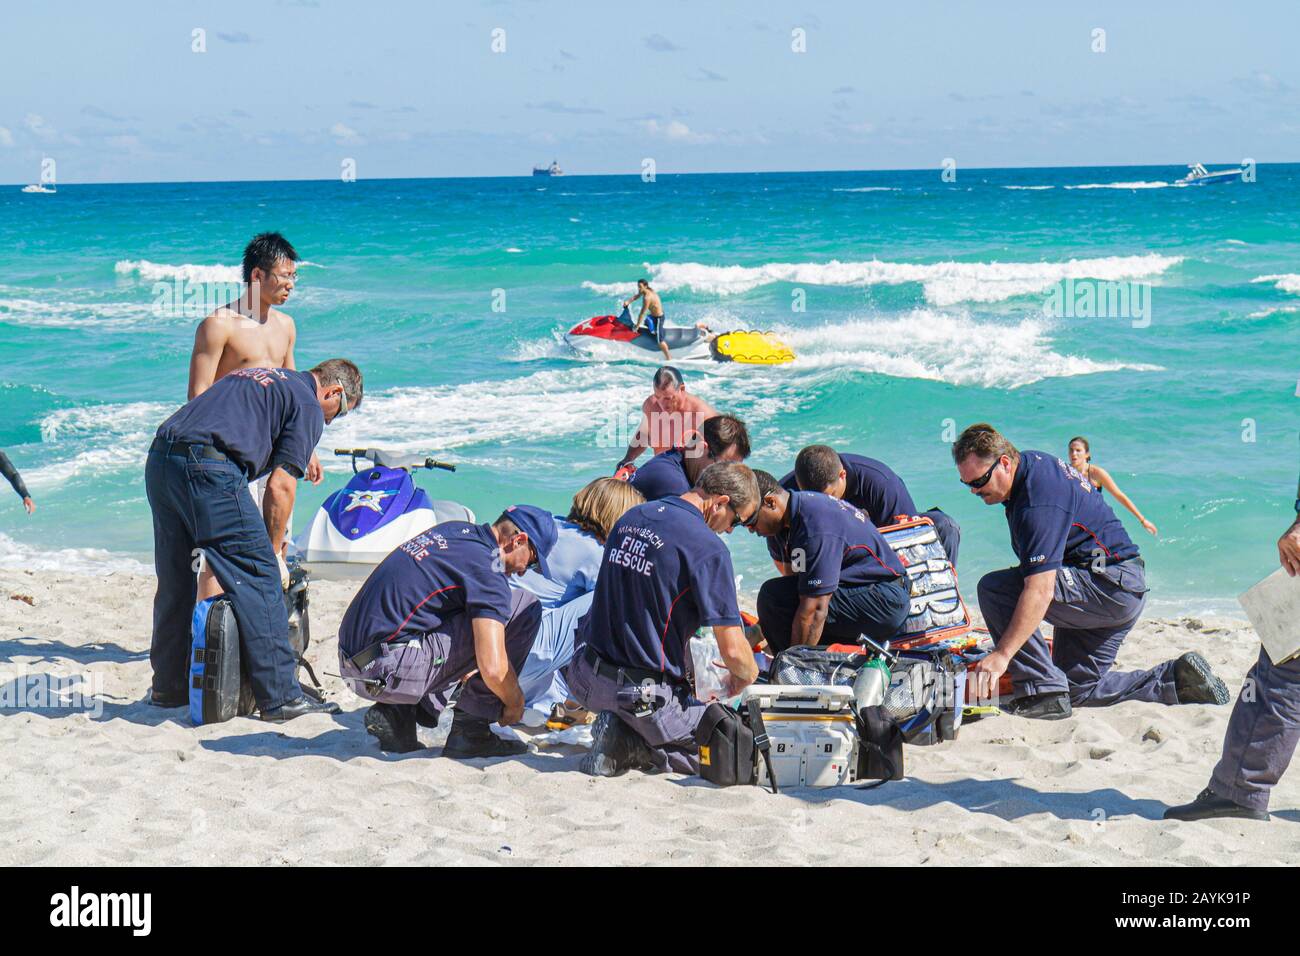 Miami Beach Florida,Atlantic Ocean water,fire rescue,emergency,applying CPR cardiopulmonary resuscitation,near drowning victim rough surf rip currents Stock Photo